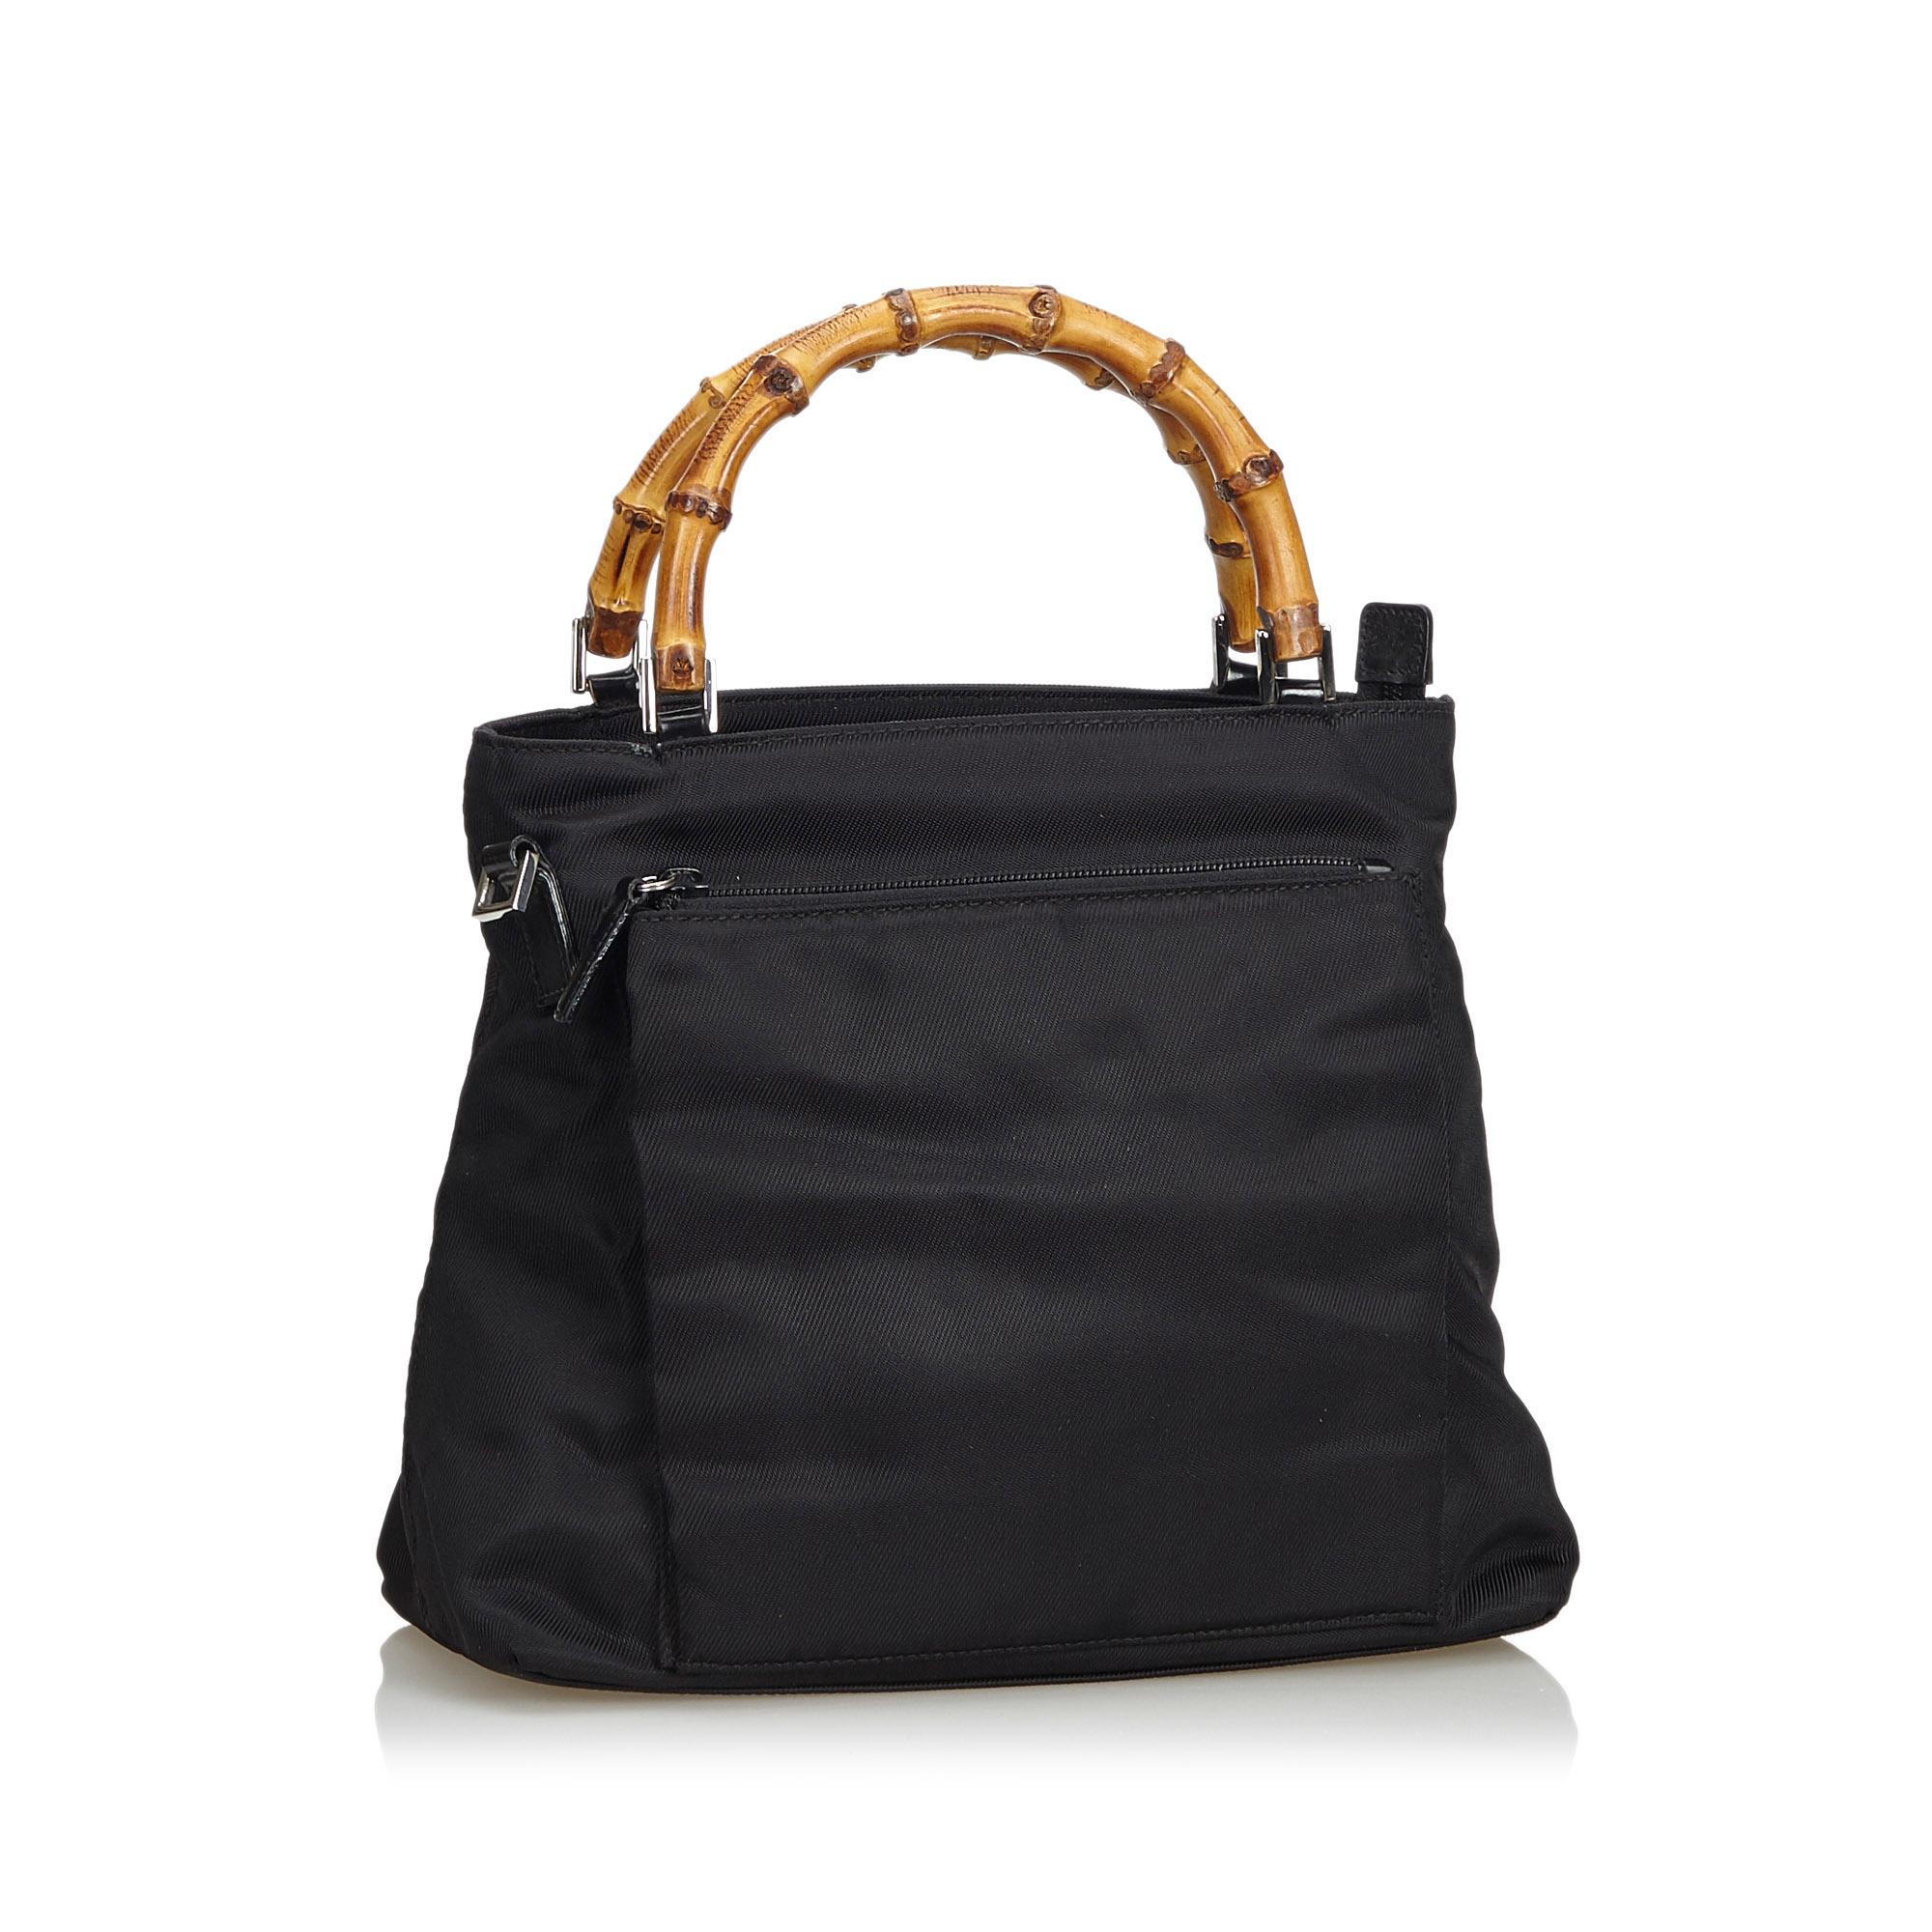 This satchel features a nylon body, an exterior zip pocket, a bamboo top handle, a flat leather strap, a top zip closure, and interior zip pocket. It carries as AB condition rating.

Inclusions: 
This item does not come with